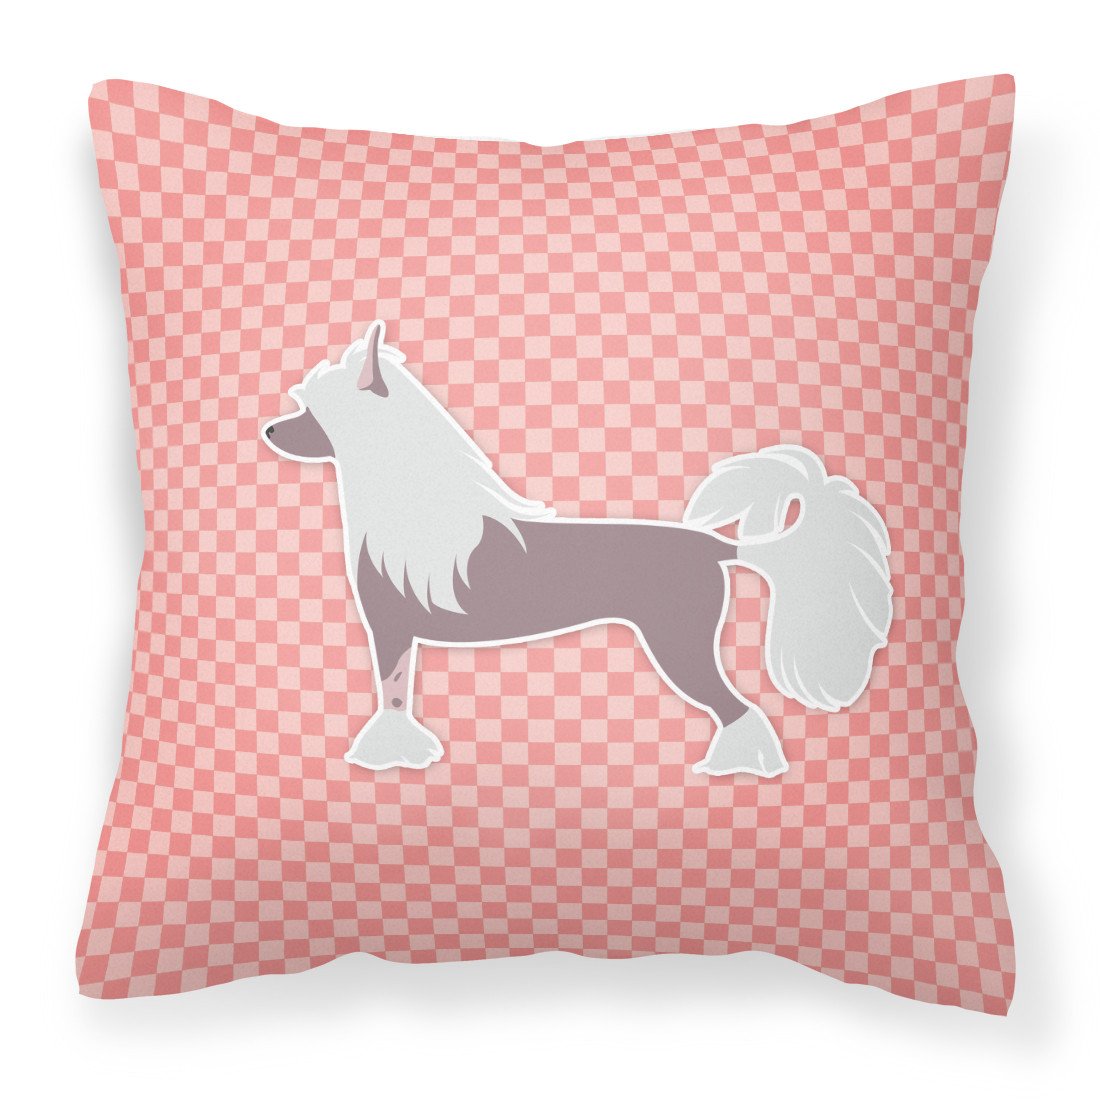 Chinese Crested Checkerboard Pink Fabric Decorative Pillow BB3643PW1818 by Caroline's Treasures